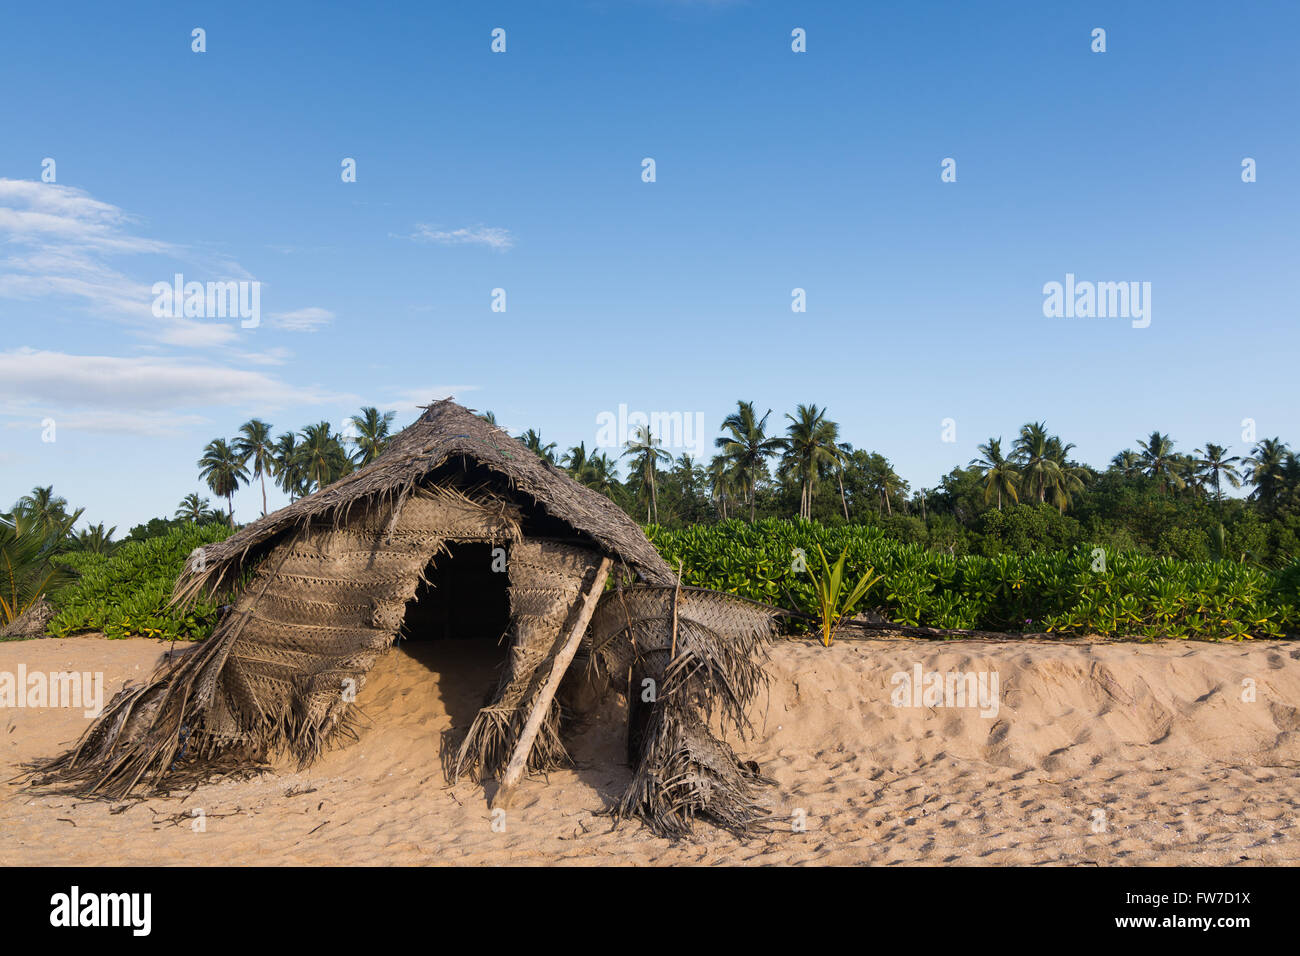 Wry hut made of palm branches standing on the beach Stock Photo